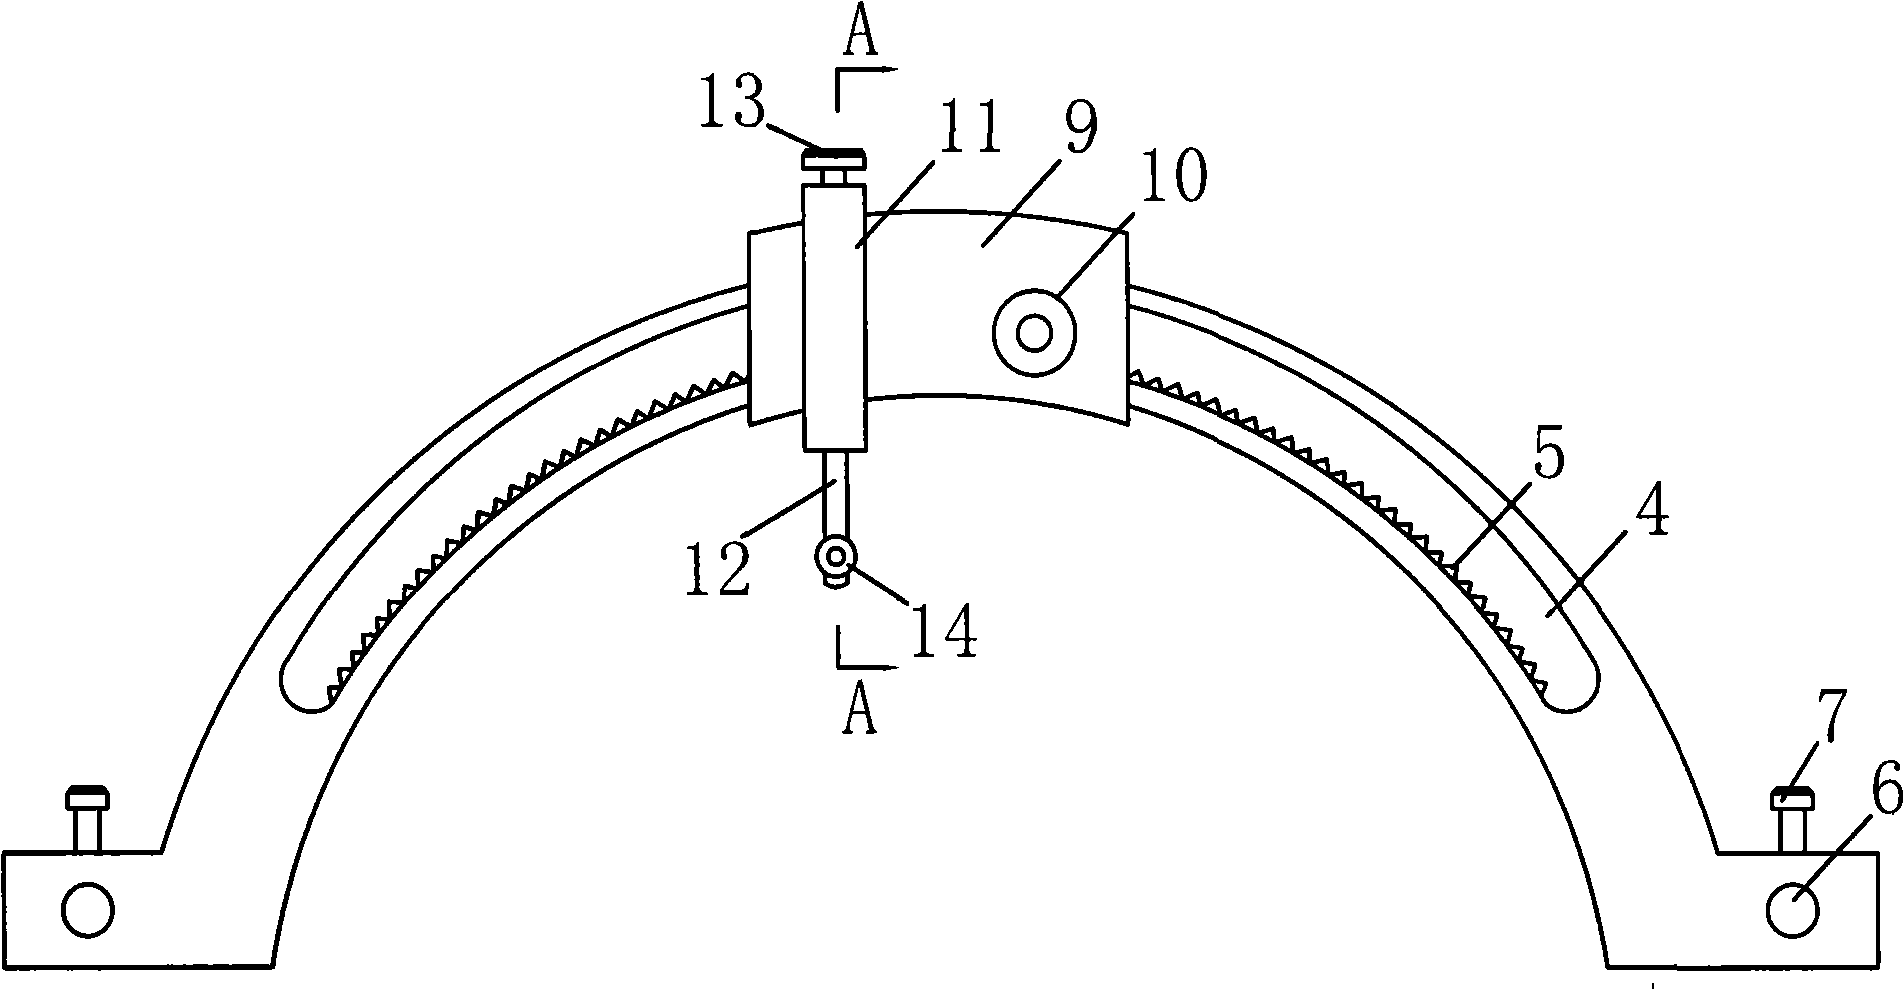 Limb fracture reduction device